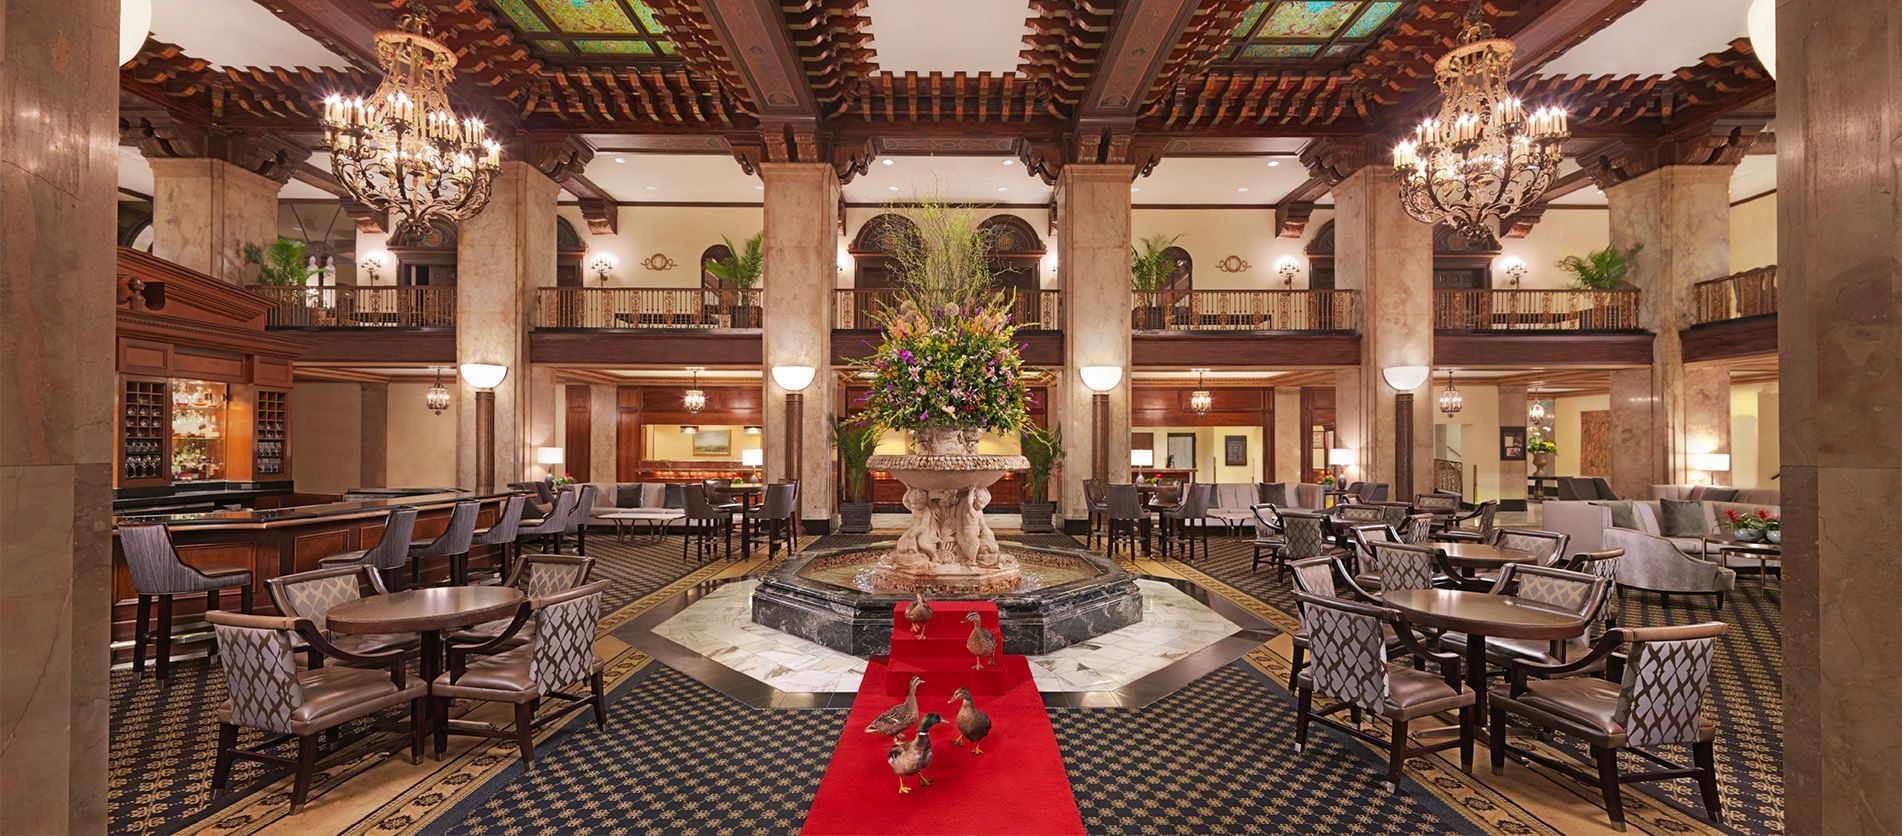 Interior of the grand lobby at The Peabody Memphis